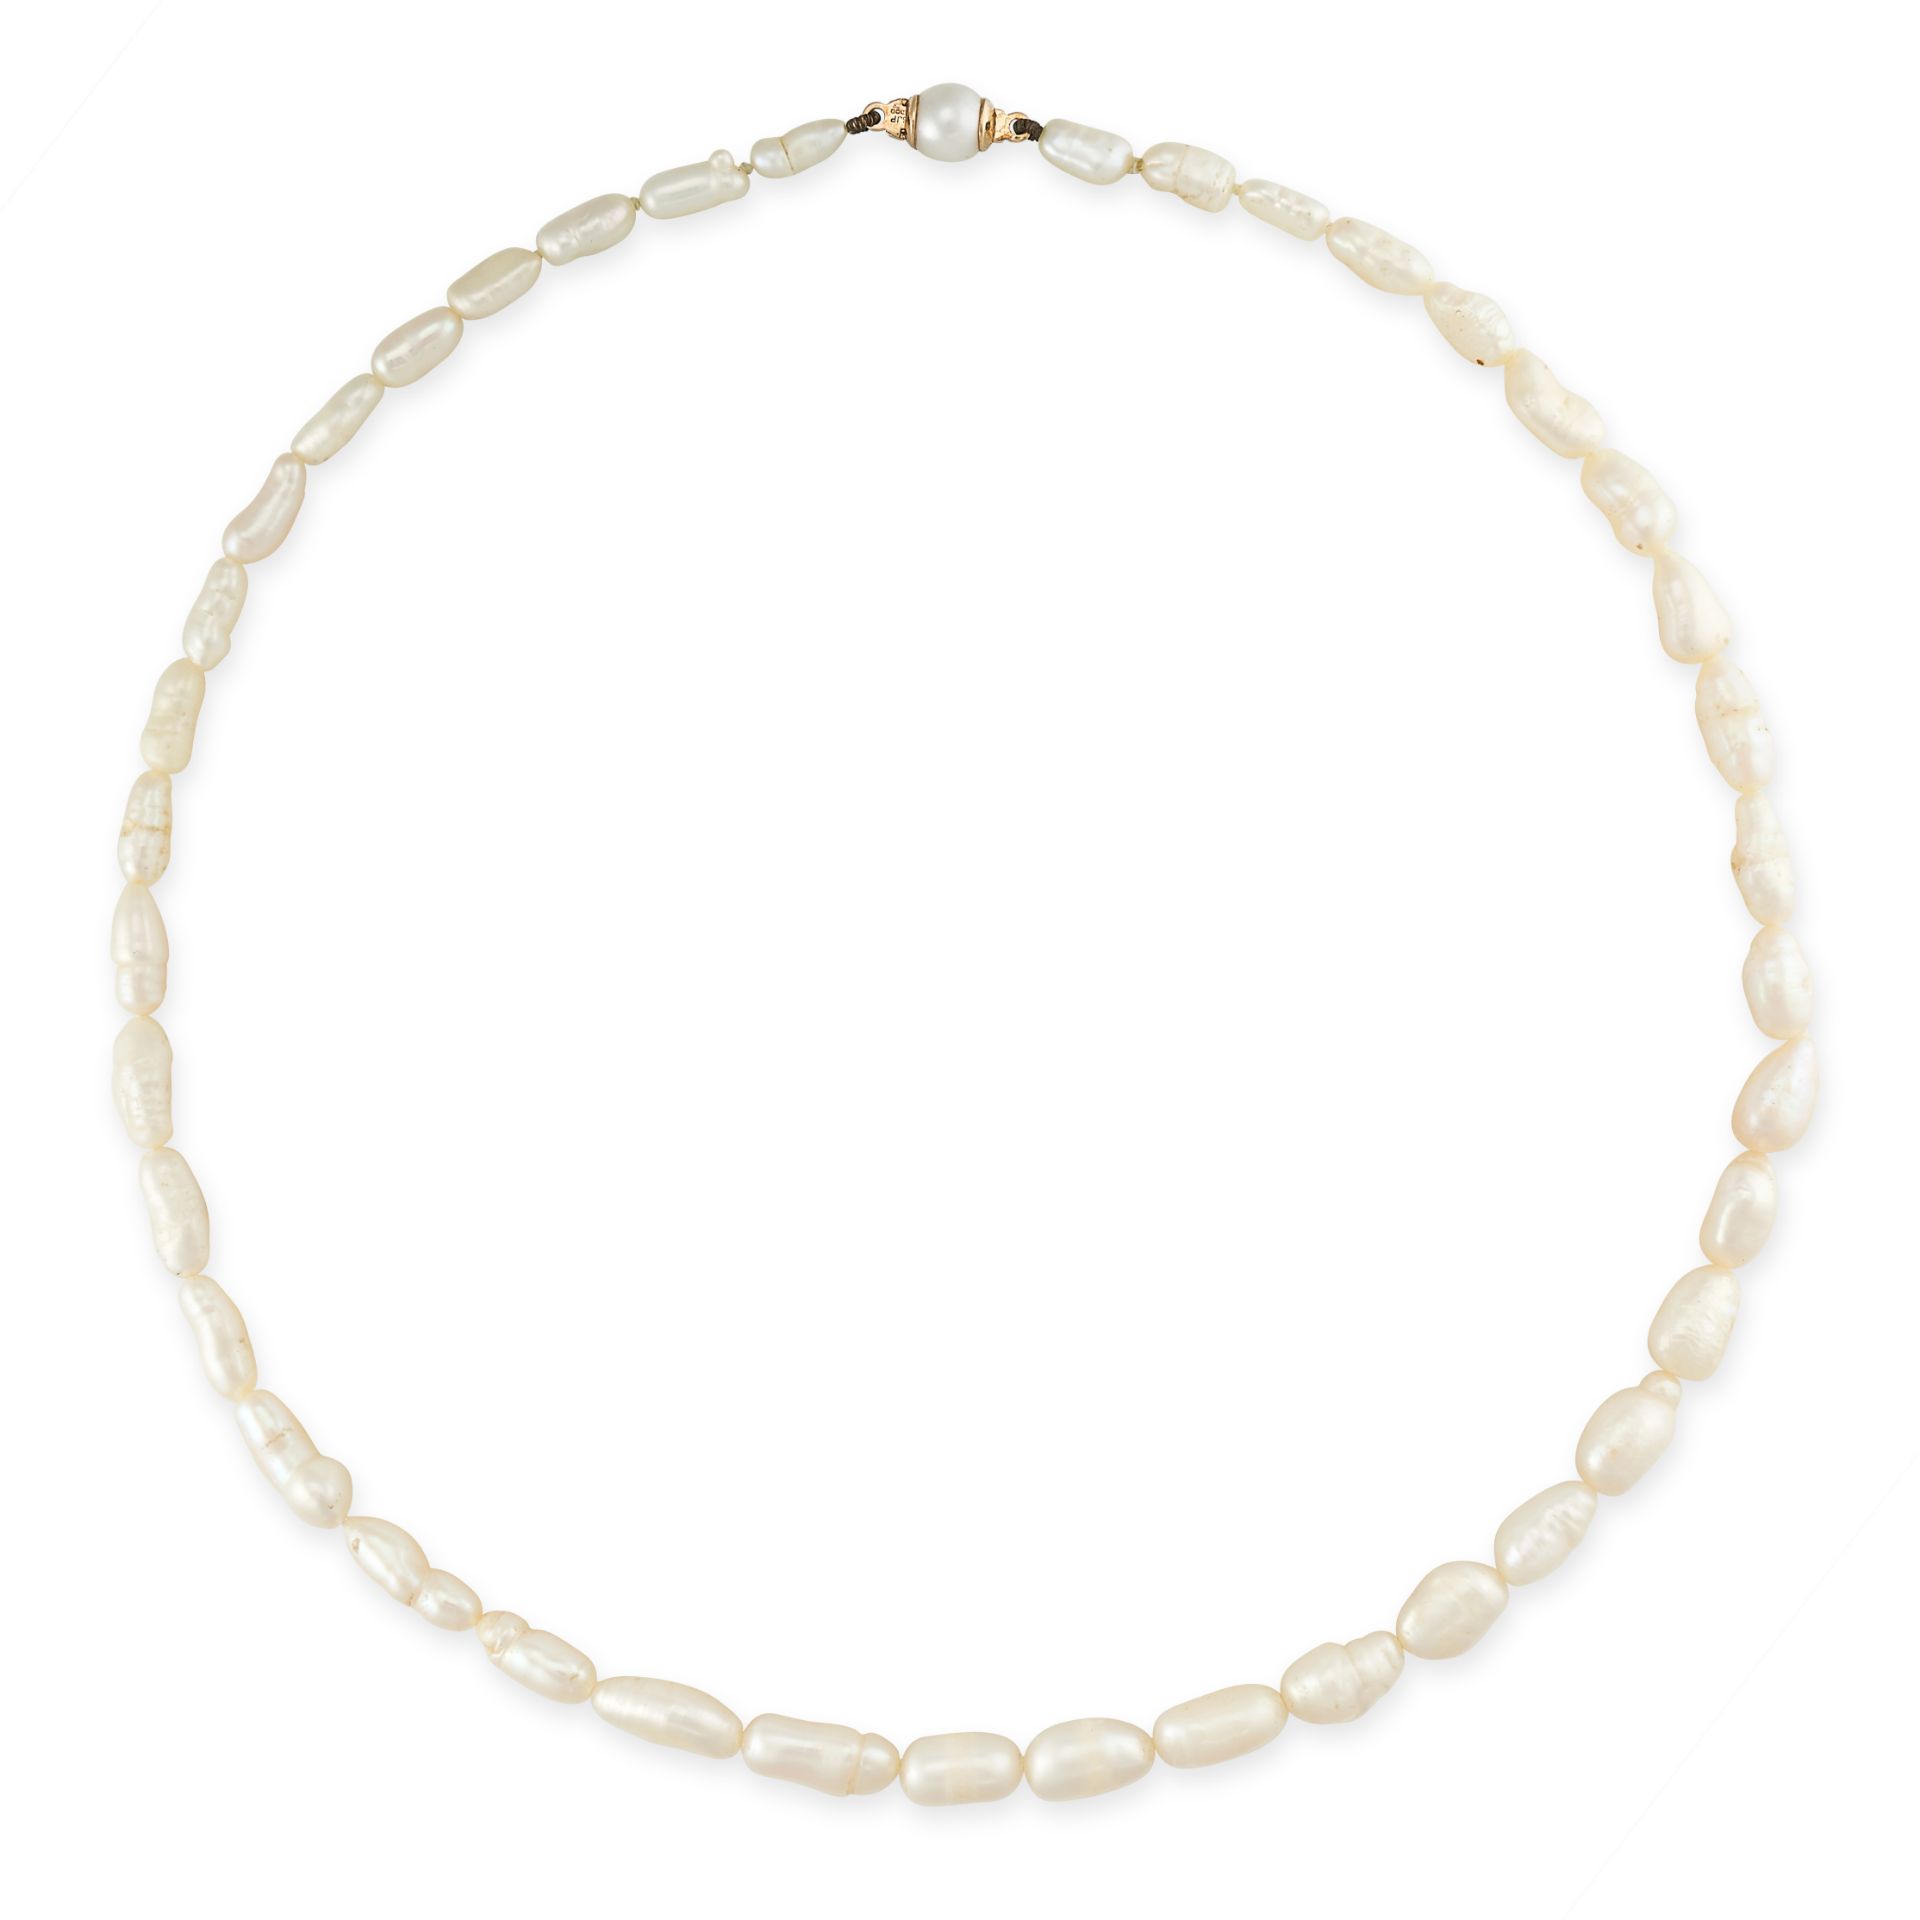 NO RESERVE - A PEARL NECKLACE  Made in 9 carat yellow gold  Forty graduated baroque pearls,